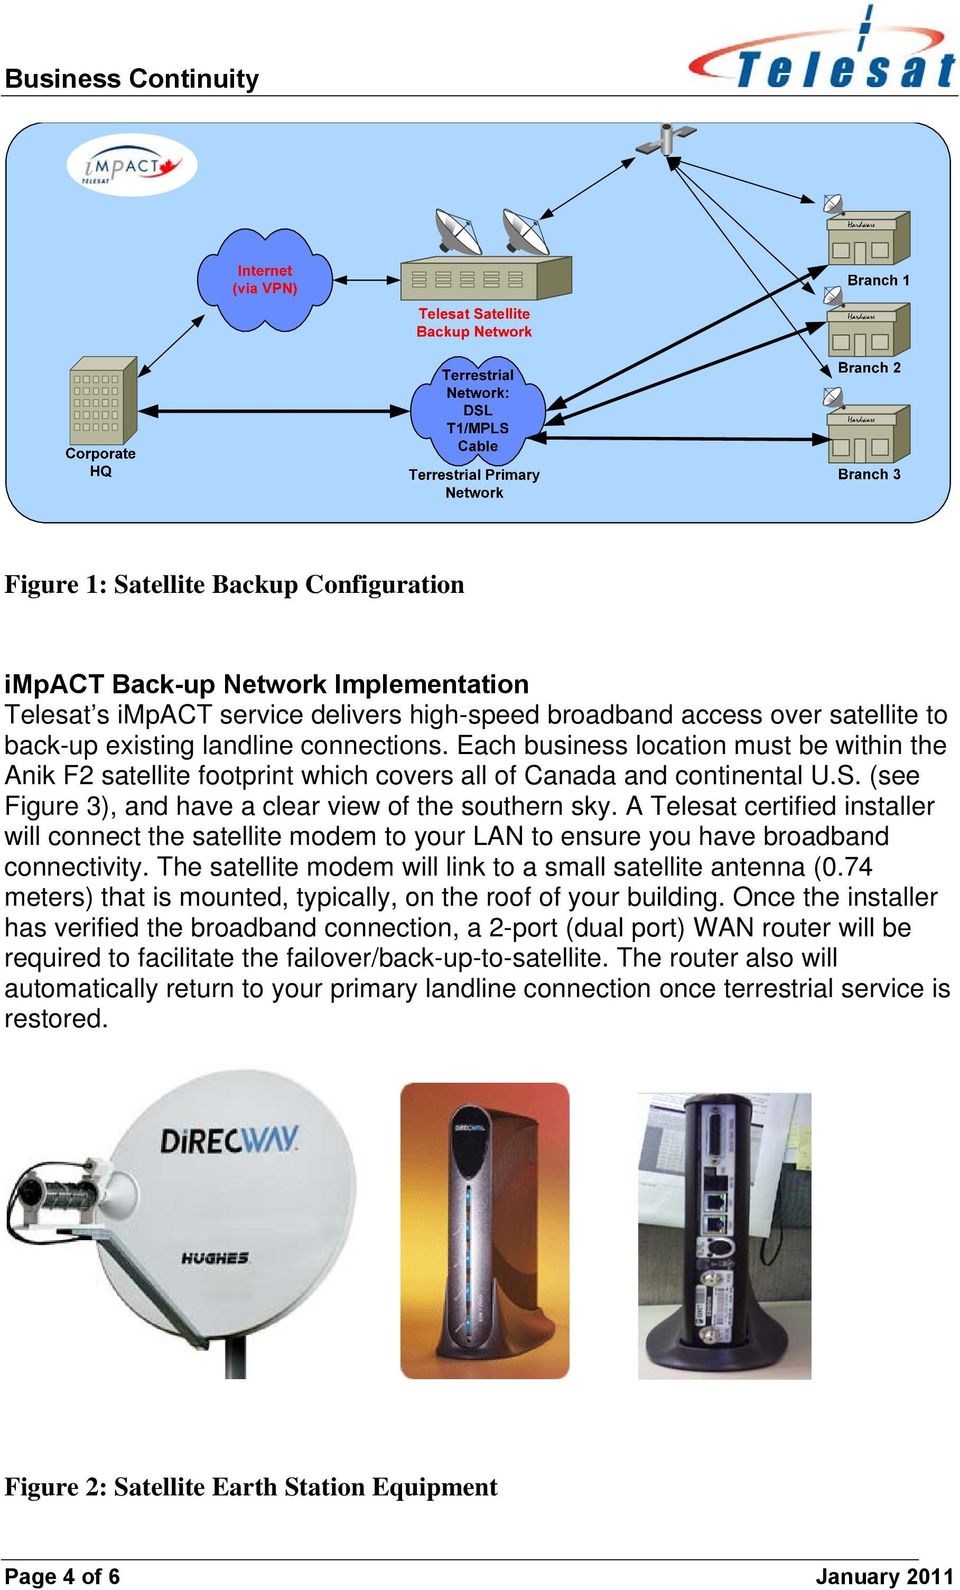 A Telesat certified installer will connect the satellite modem to your LAN to ensure you have broadband connectivity. The satellite modem will link to a small satellite antenna (0.